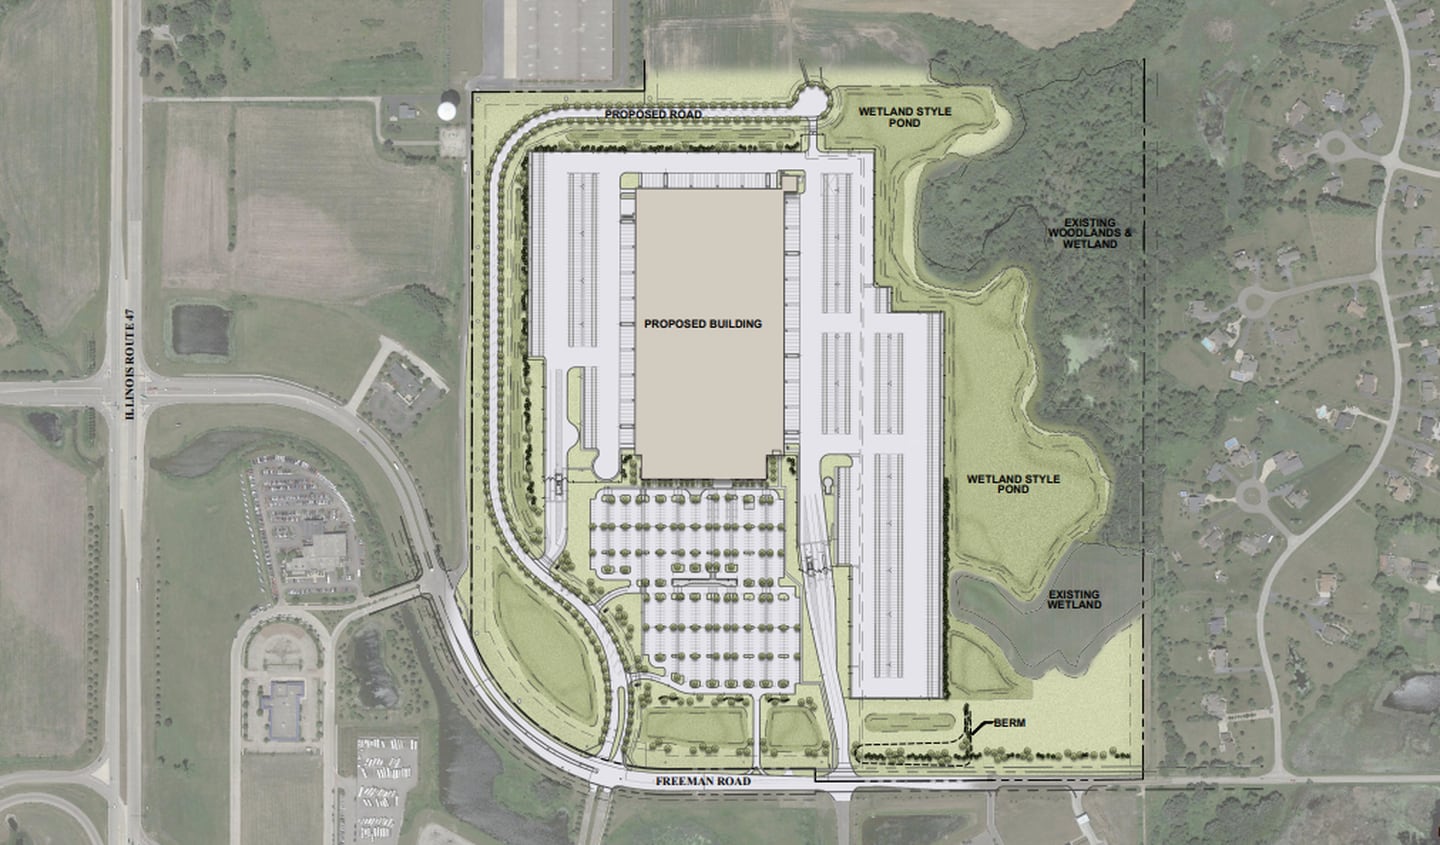 A more detailed site map of a new proposal to develop a large property on Freeman Road shows the distribution center planned in the first phase of construction. The company that will move into the site remains unnamed, but has promised to bring upwards of 1,000 jobs to Huntley in 2022. The Huntley Village Board will vote on the development plan in its March 11 meeting.